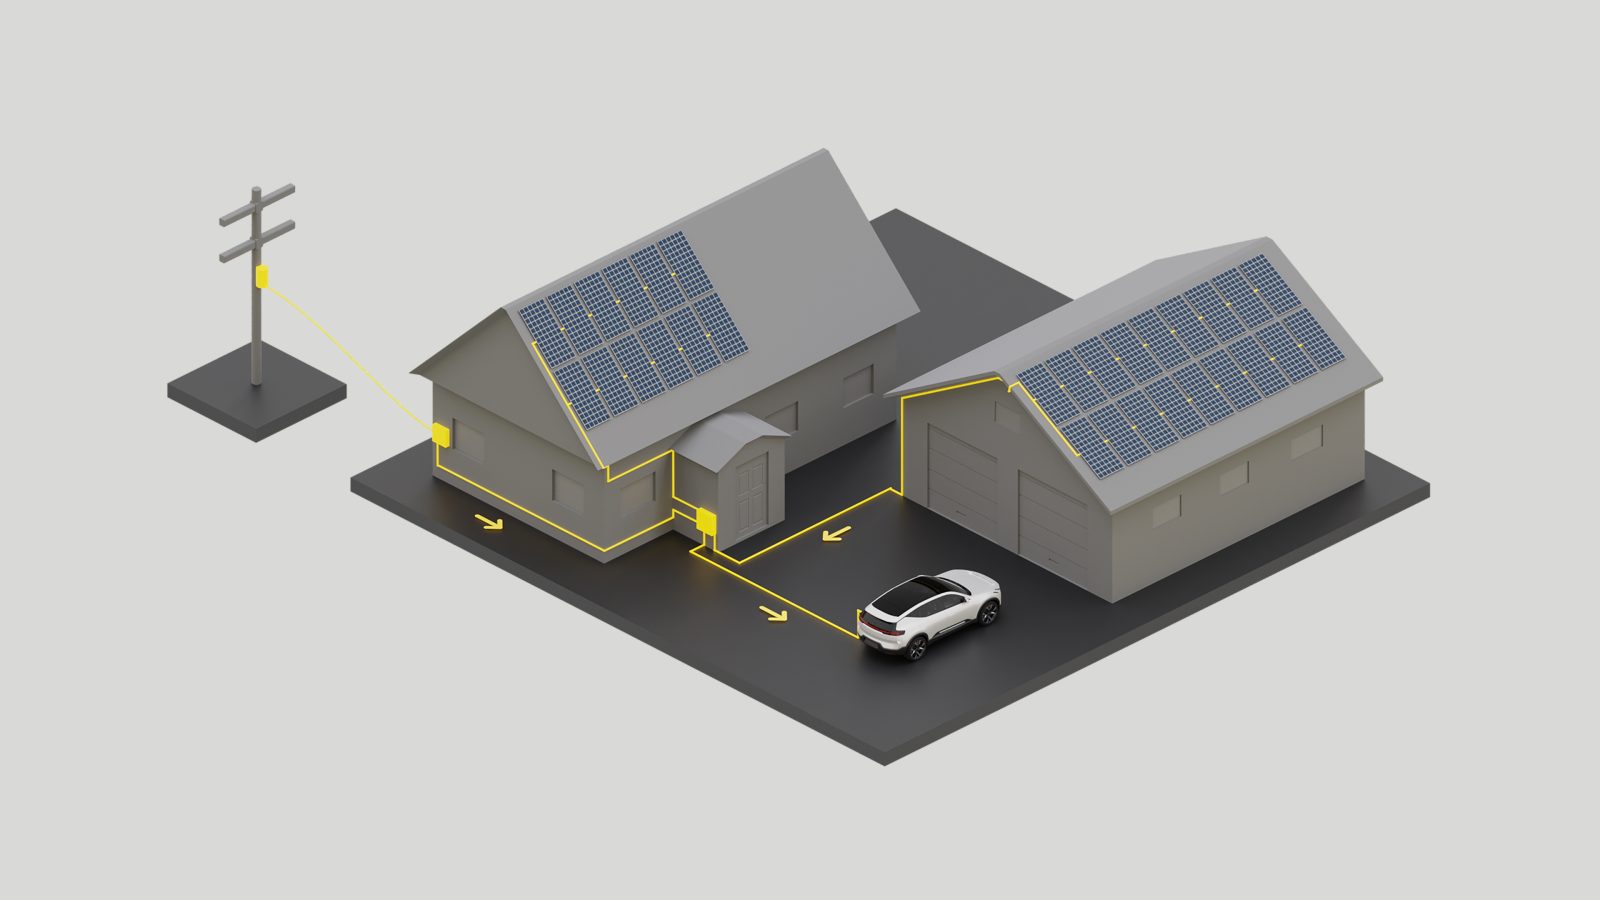 polestar wants to save the grid with v2g virtual power plant trial in ca/sweden